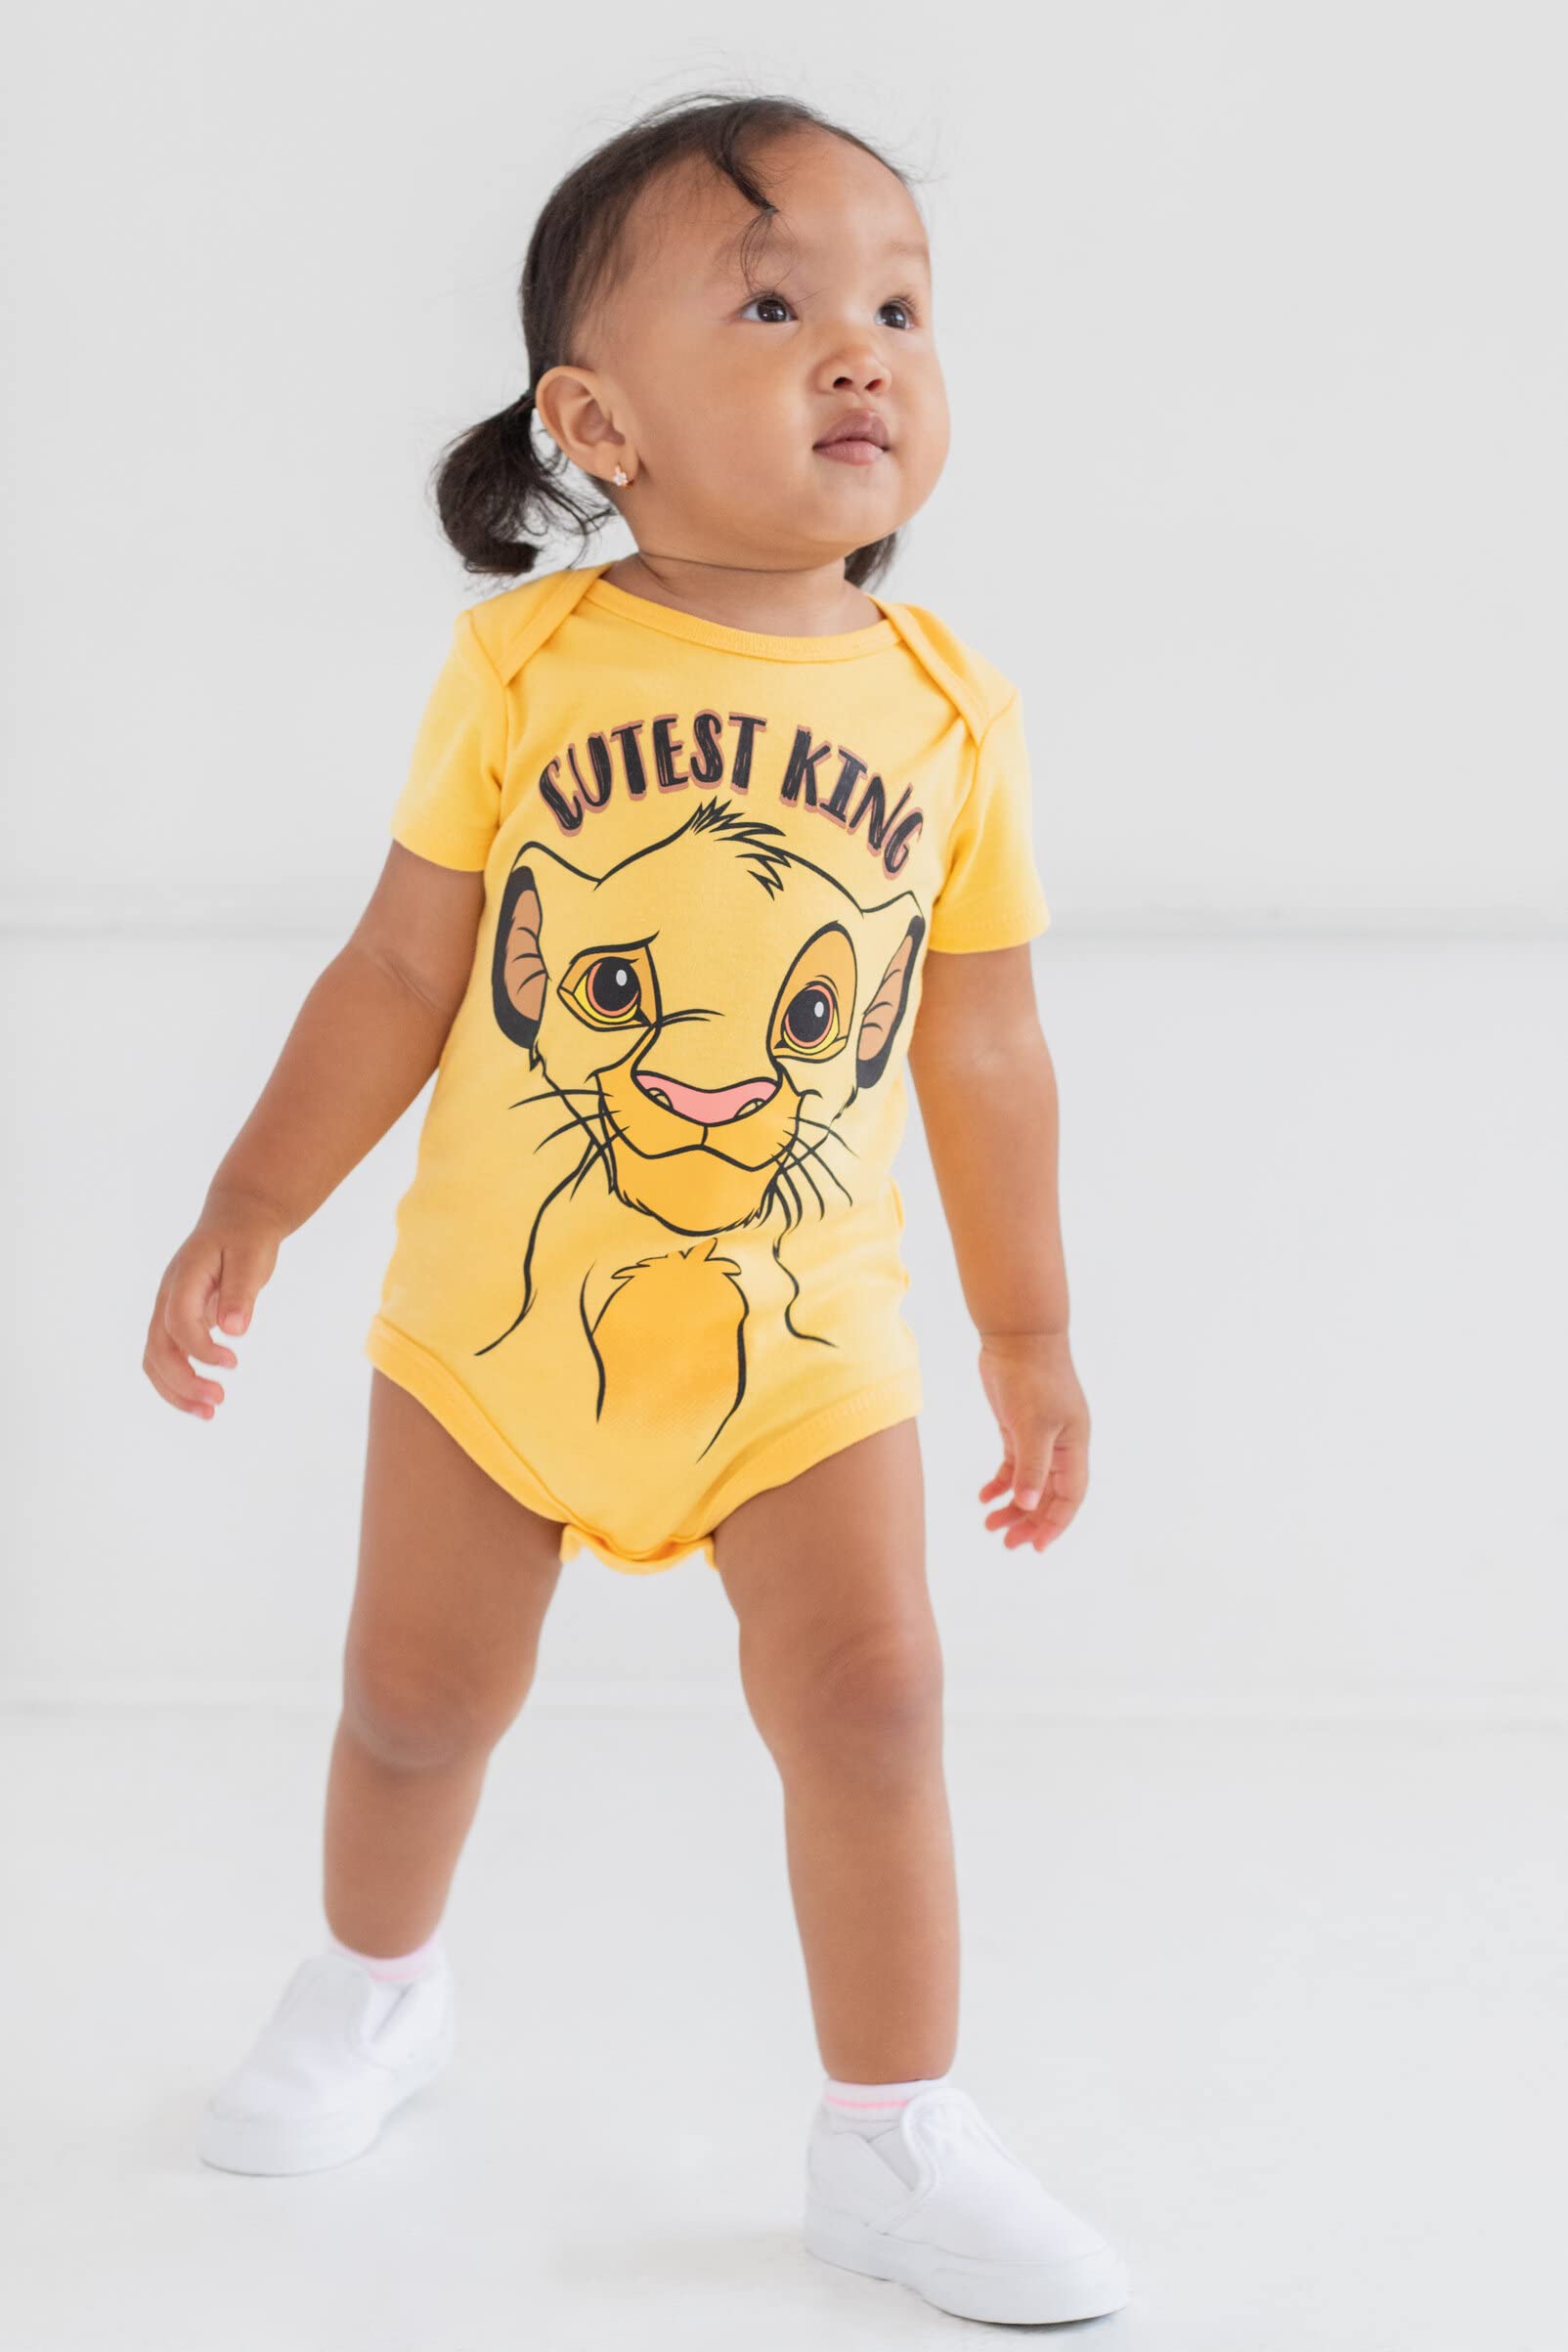 Disney Mickey Mouse Lion King Winnie the Pooh Pixar Toy Story Finding Nemo Baby 5 Pack Bodysuits Newborn to Infant